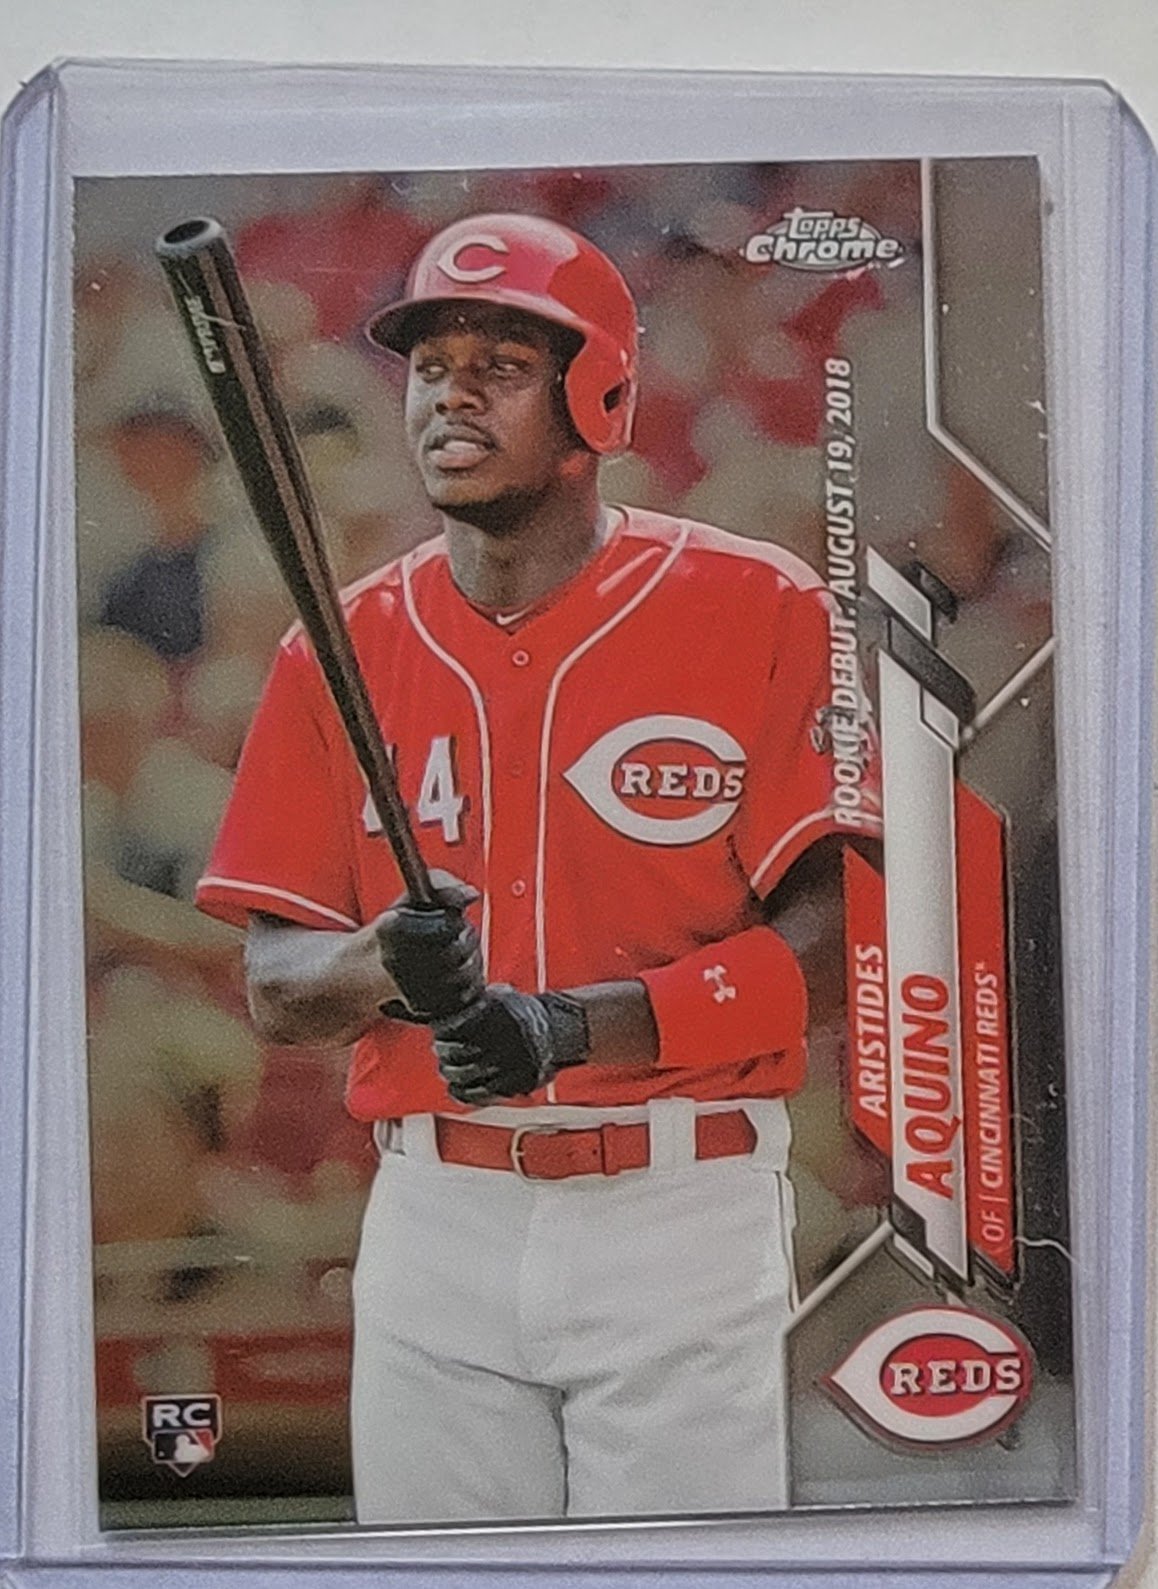 2020 Topps Chrome Aristides Aquino Rookie Baseball Card TPTV simple Xclusive Collectibles   